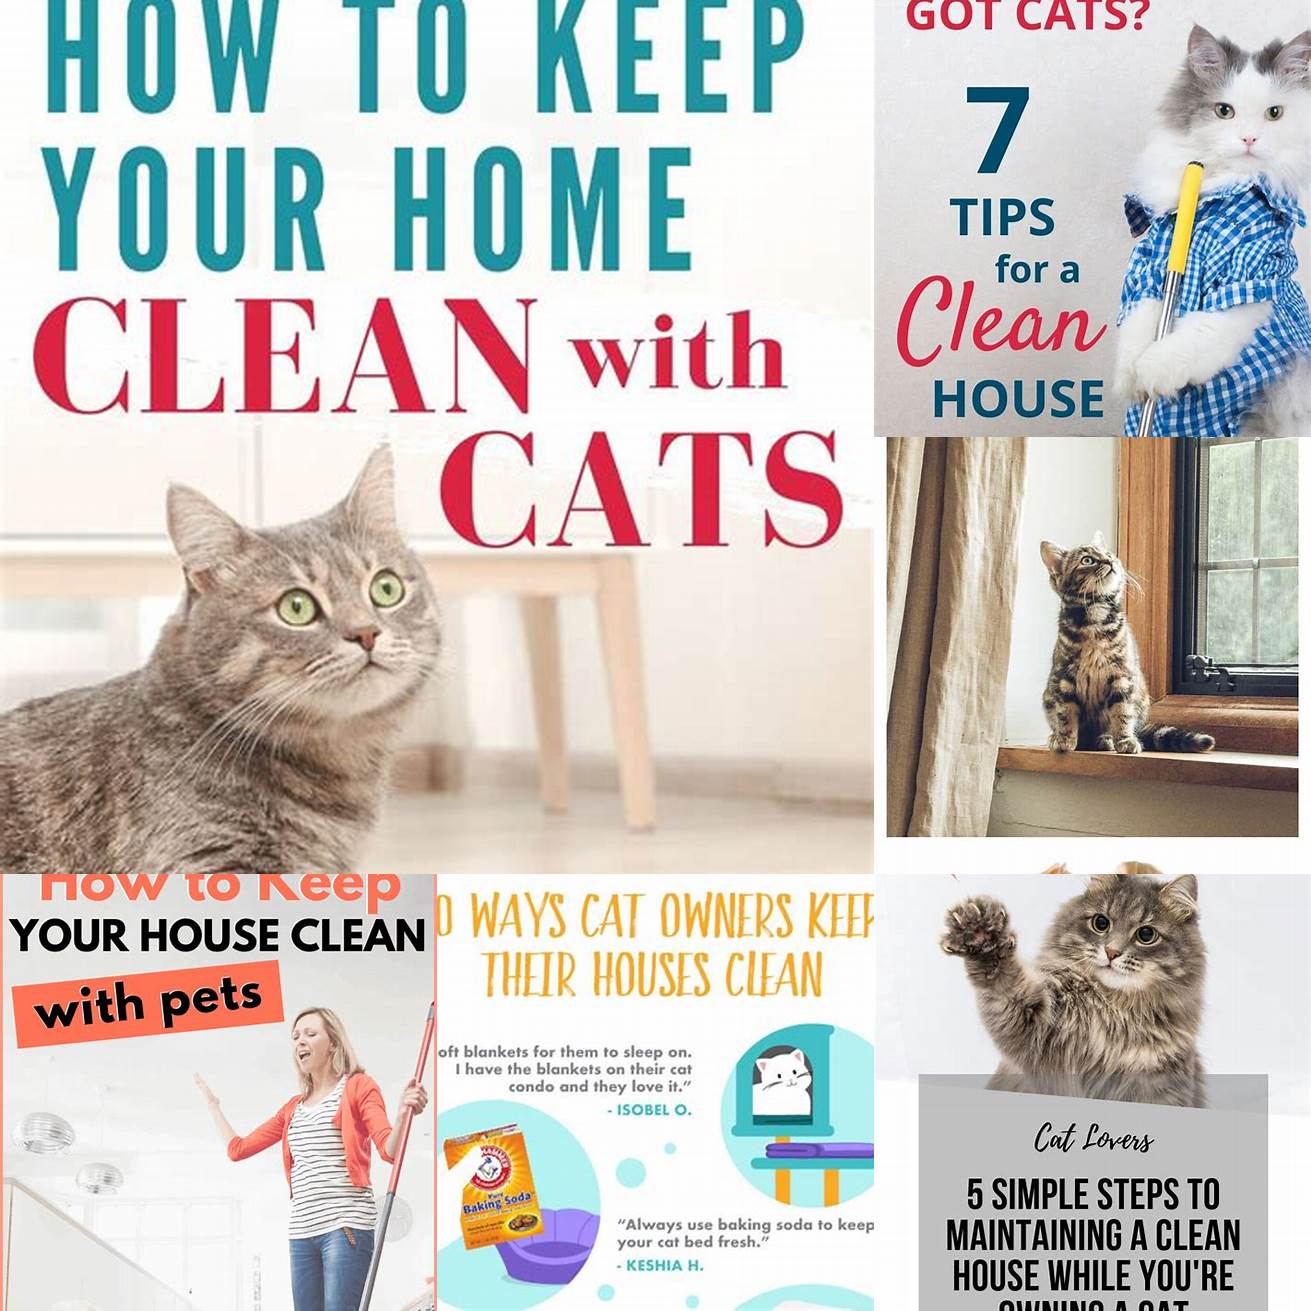 Keep your home clean